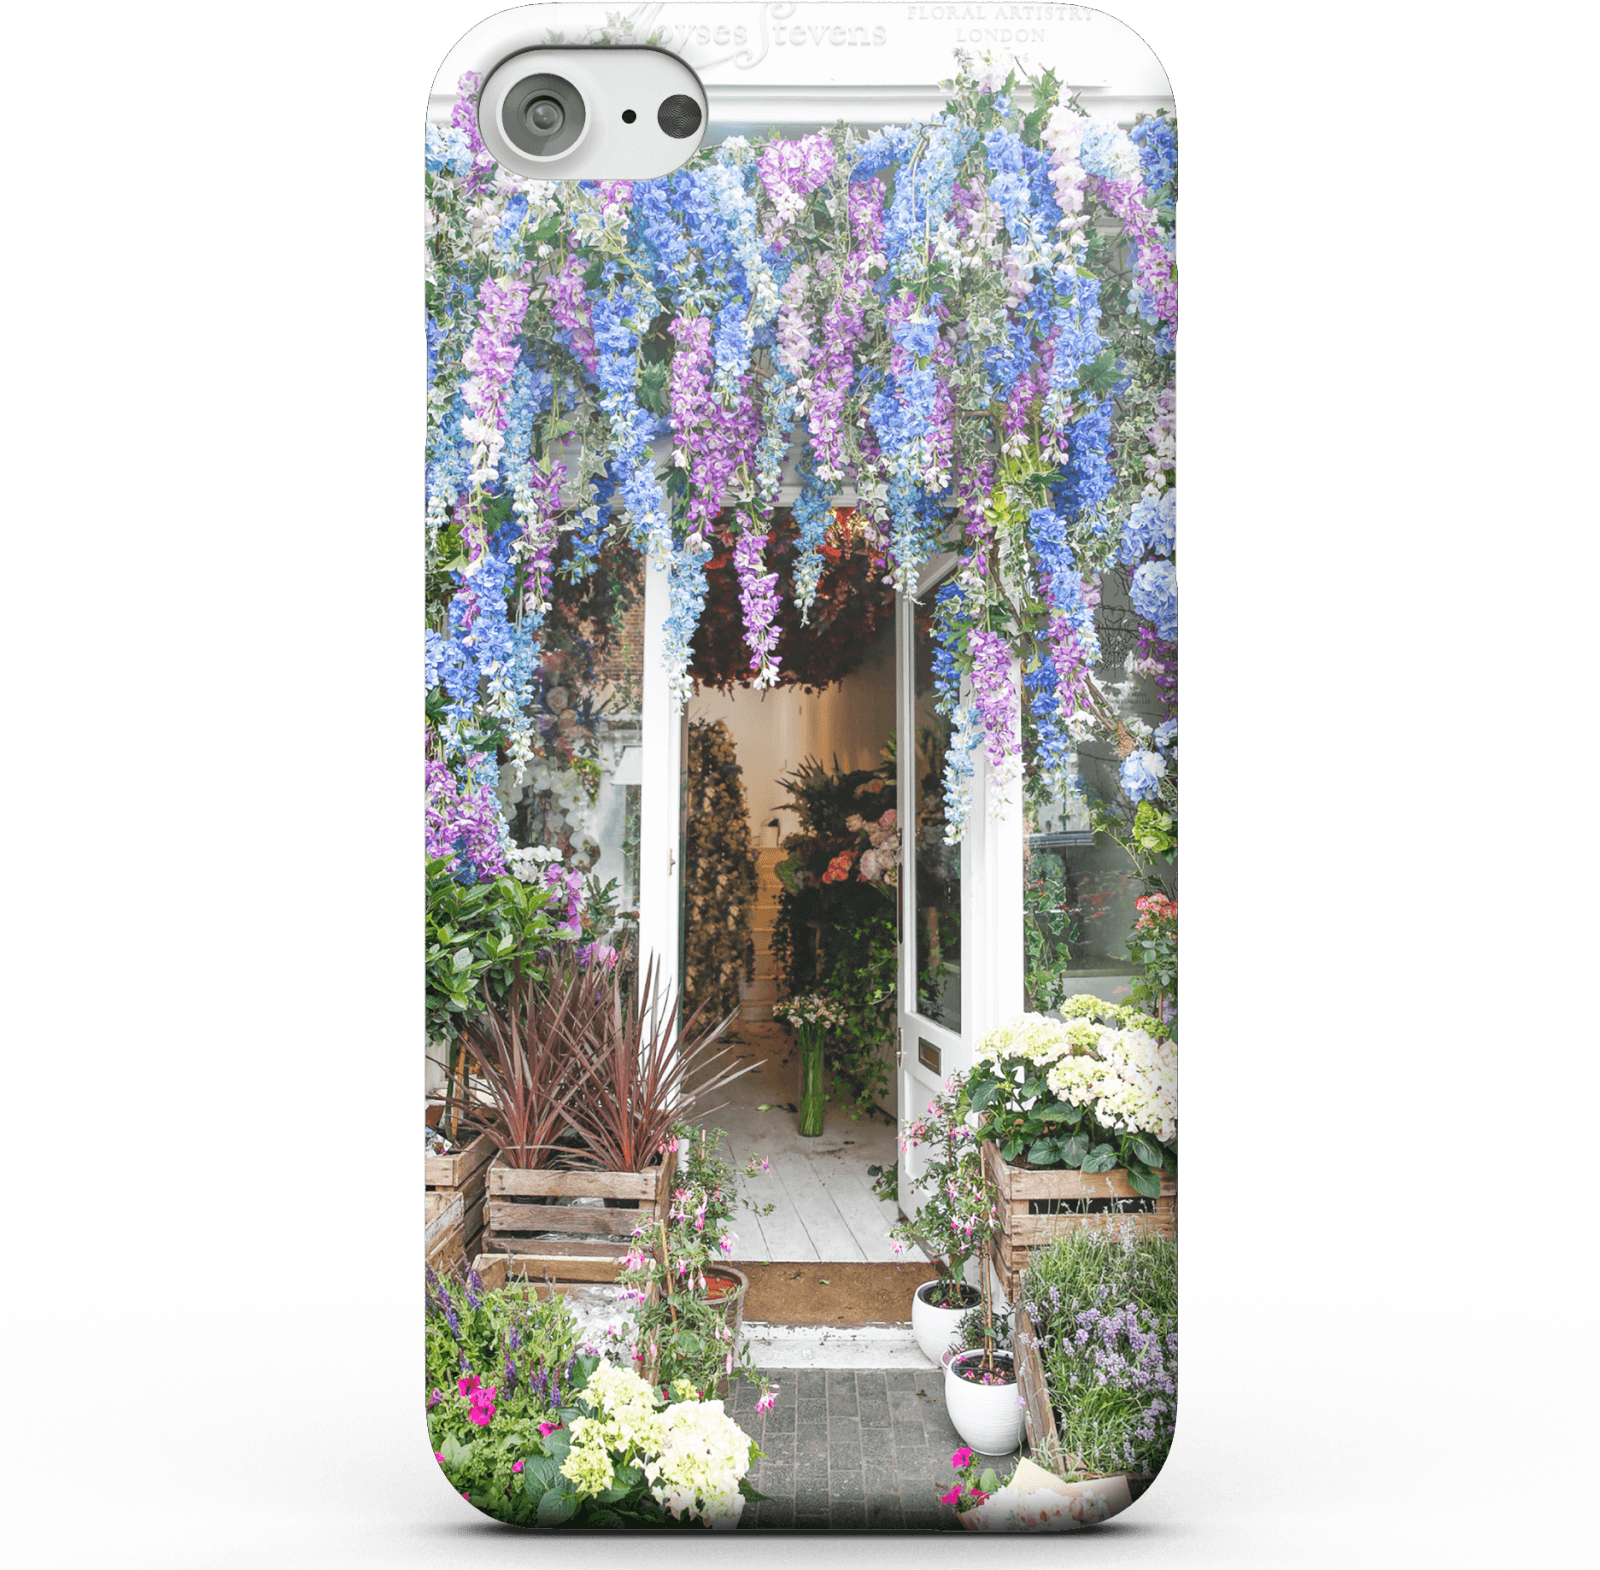 Floral Doorway Phone Case for iPhone and Android - iPhone 5/5s - Snap Case - Matte